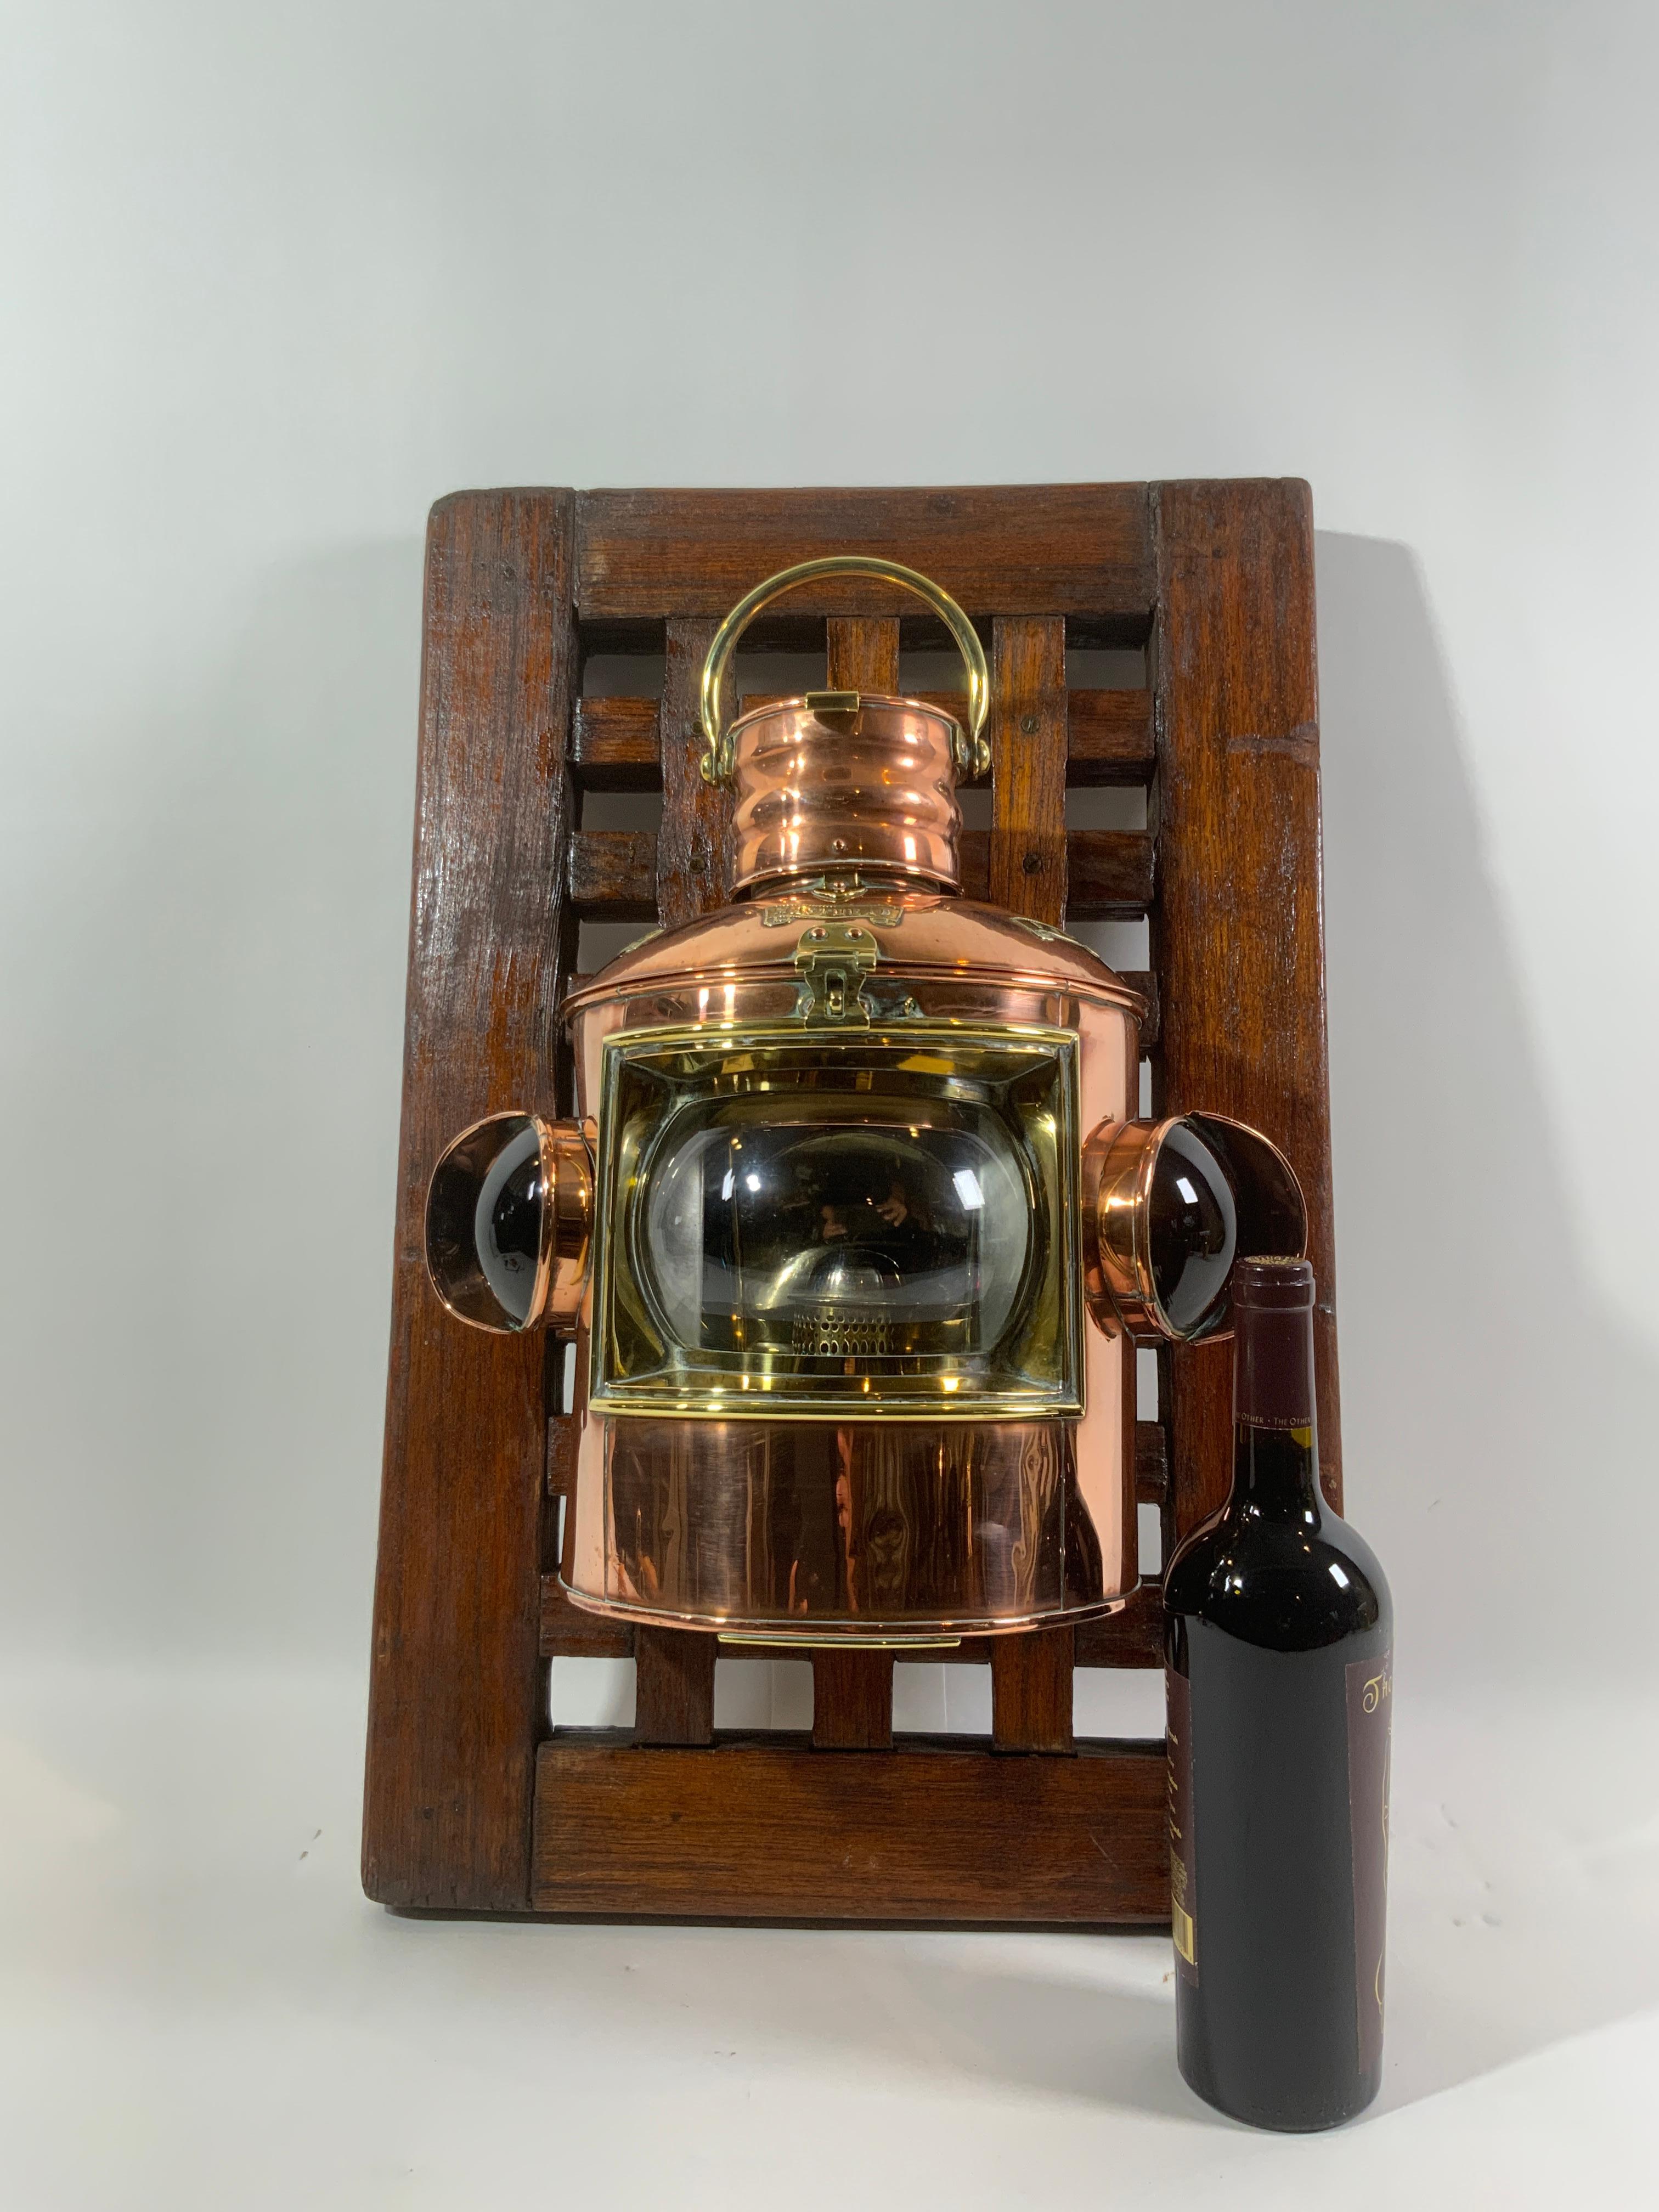 This great nautical lantern is as good as they come. Brass trim includes hasp, handle, bezel, etc.

The lantern is mounted on a section of ships grating creating an awesome display.

Weight:
Overall Dimensions: 15